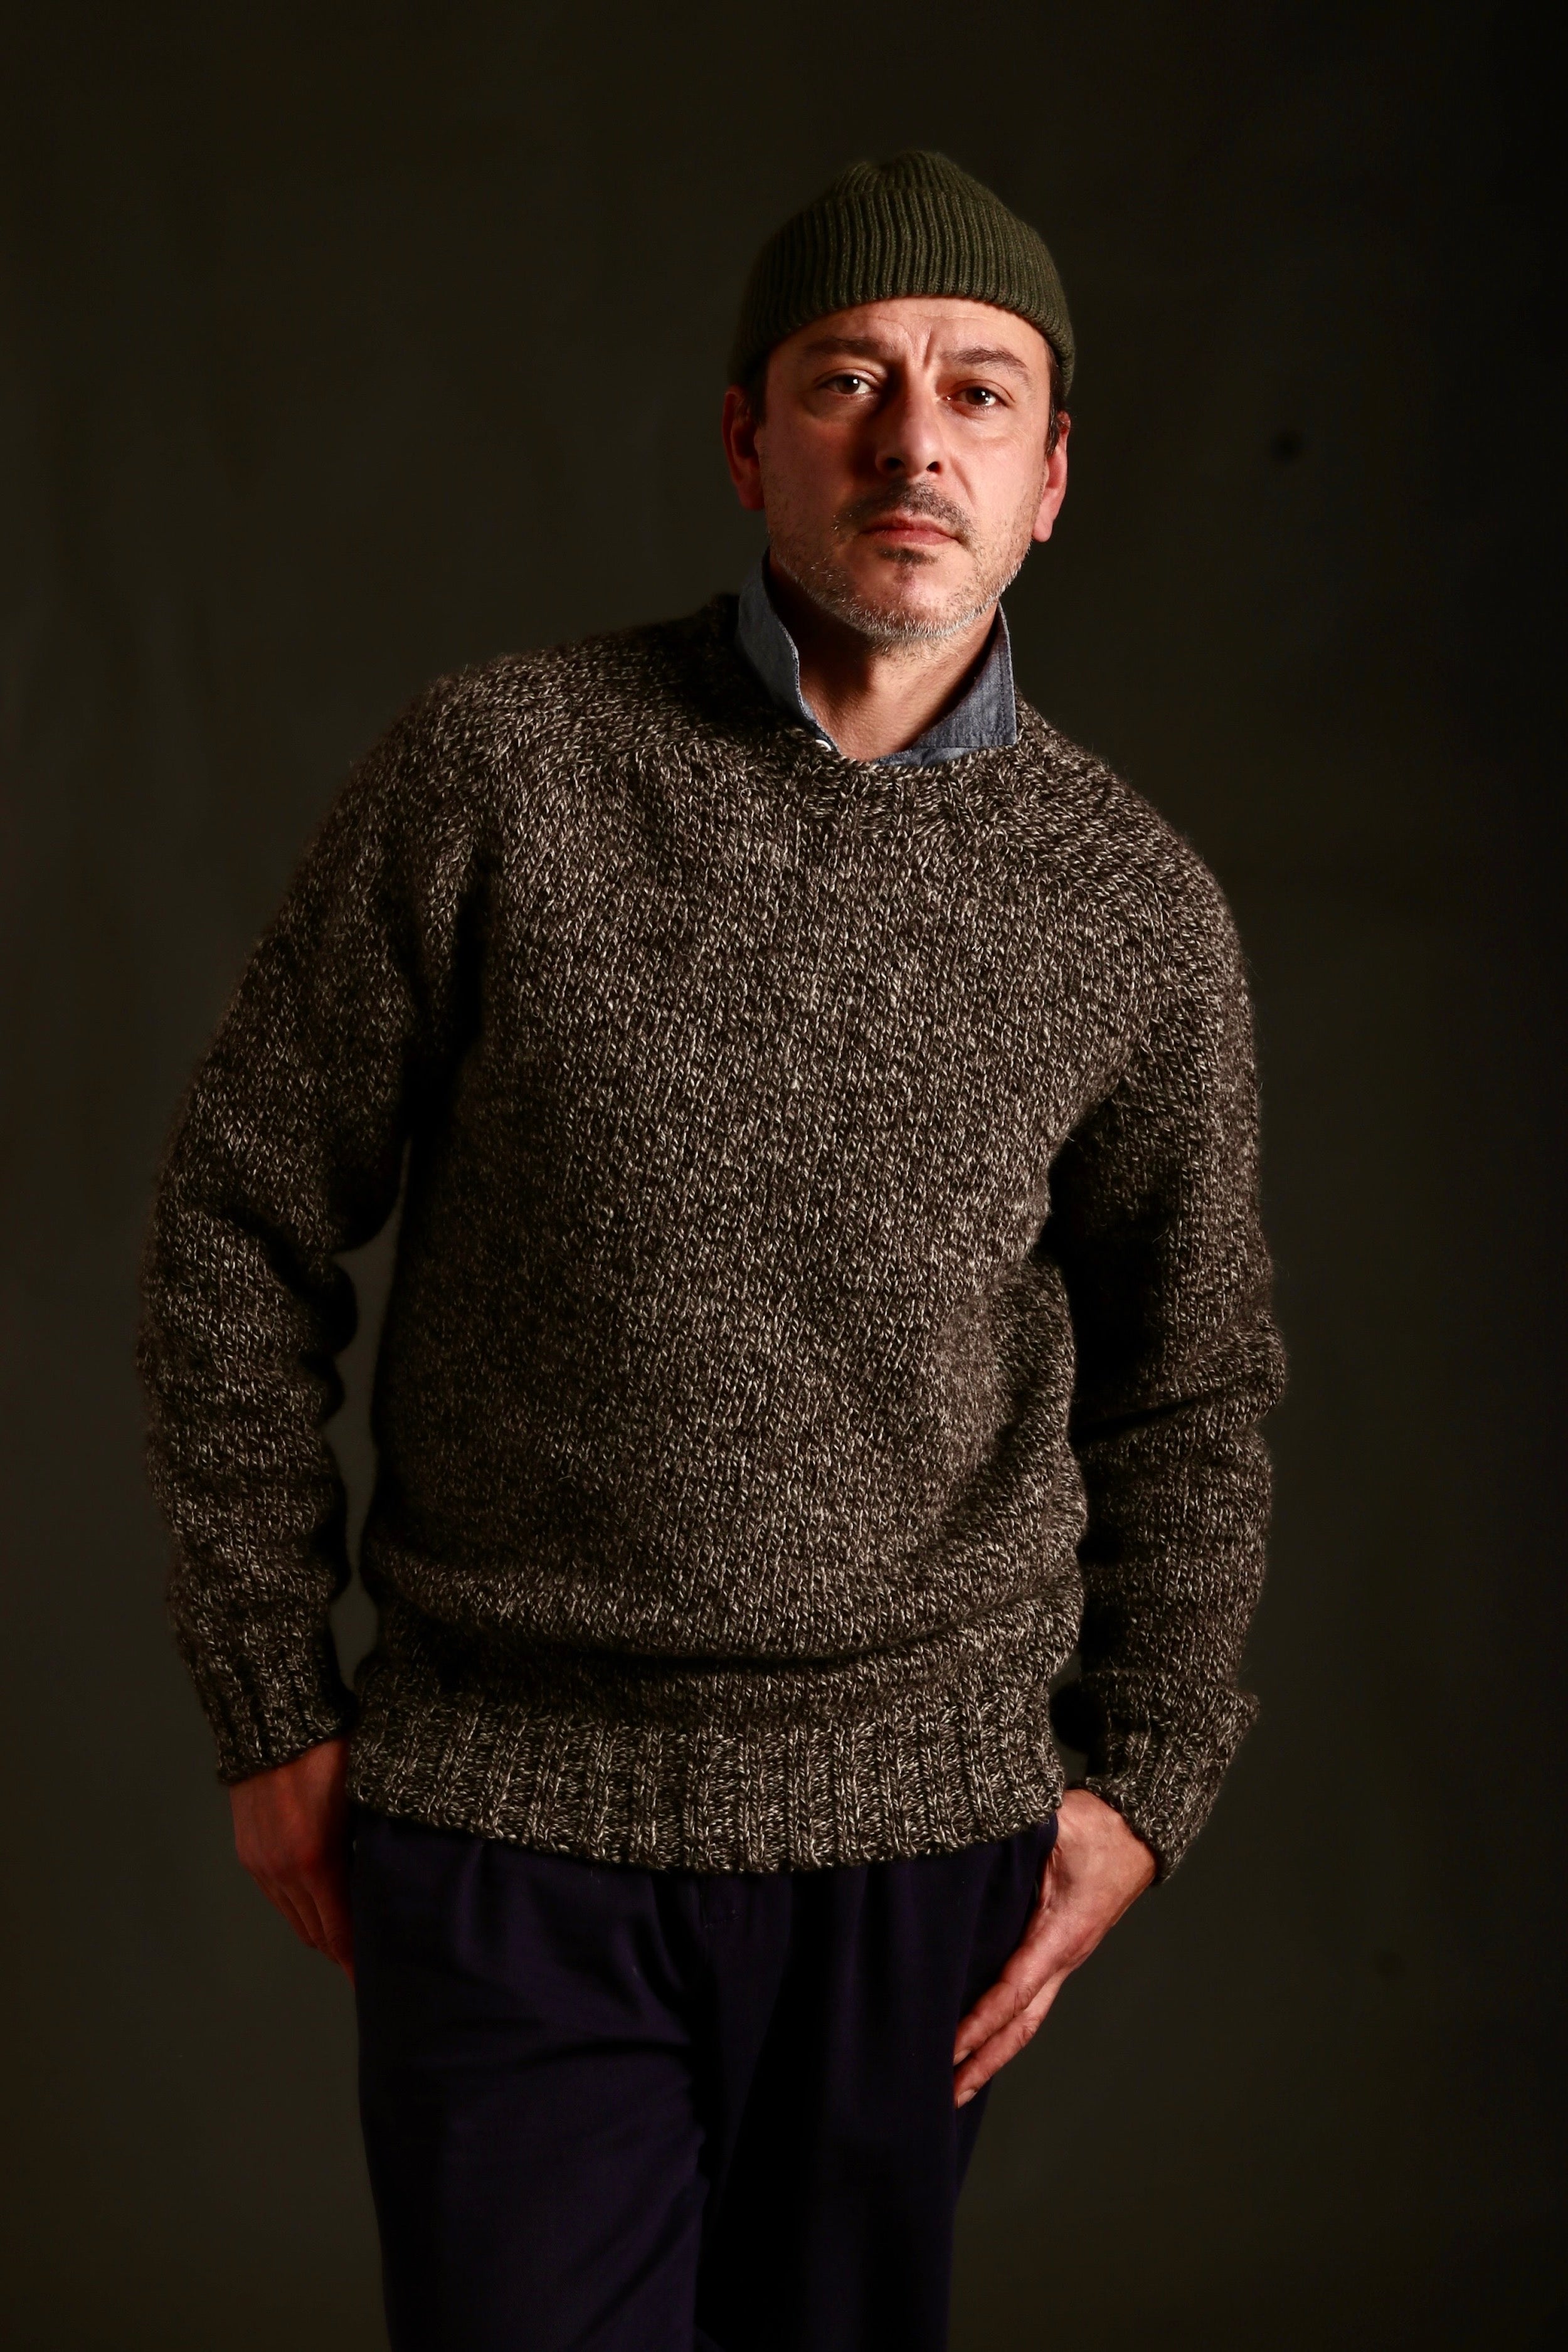 Man wears Carrier Company Heavy Heritage Wool jumper in Jacob, a blend of natural undyed wool ranging from Cream to Tan to Brown to Black, woven together to create an overall dark speckled appearance, Worn with Mens Classic Trouser and Wool Hat in Olive Drab